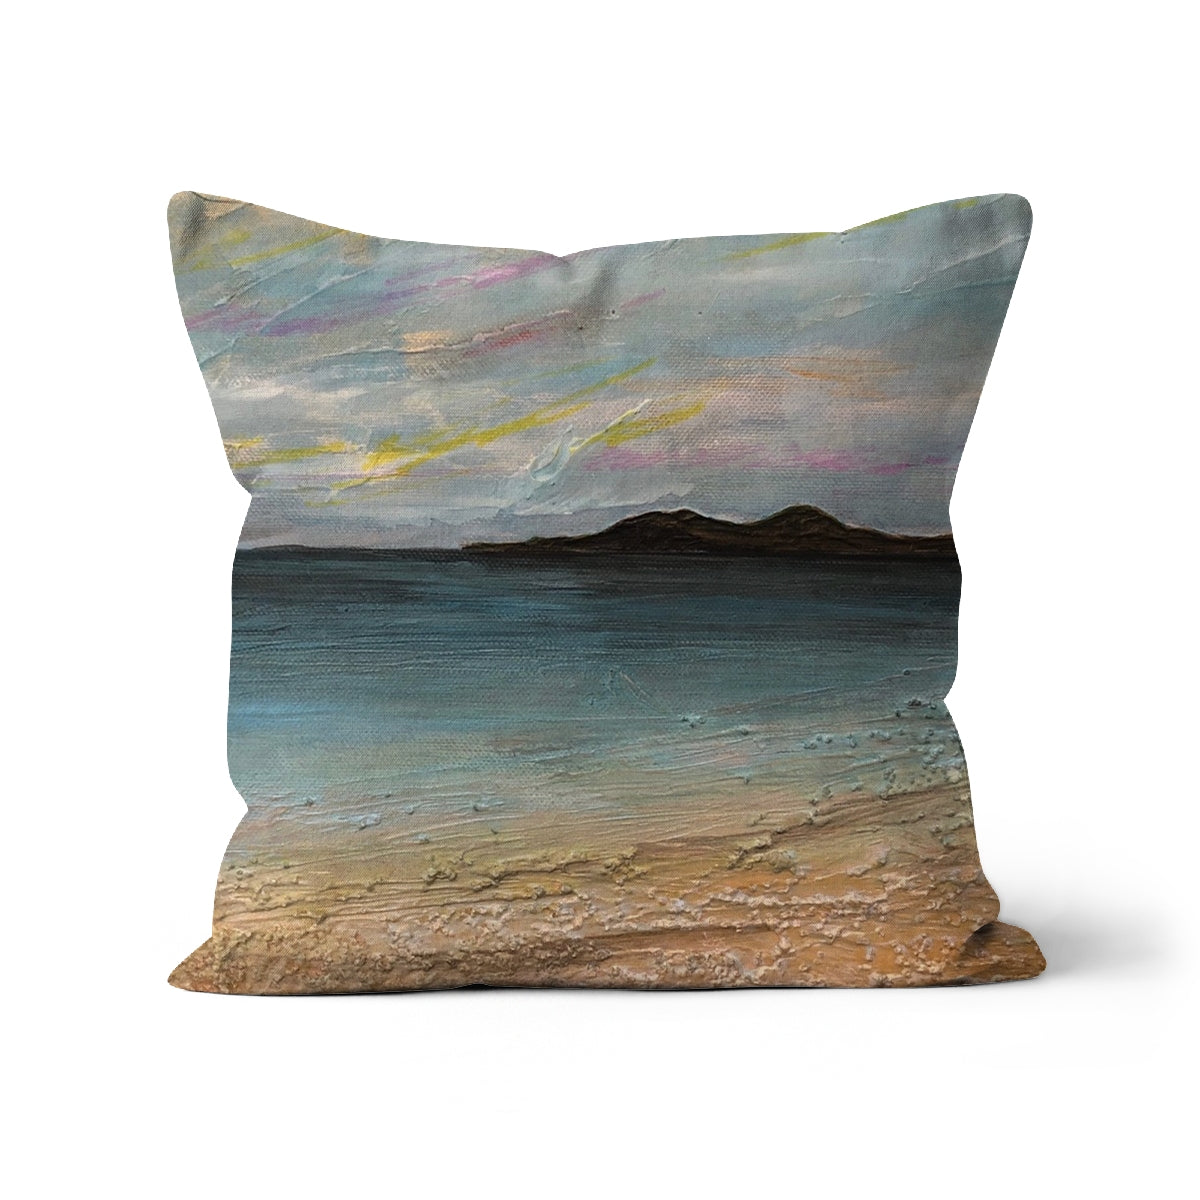 Garrynamonie Beach South Uist Art Gifts Cushion-Cushions-Hebridean Islands Art Gallery-Faux Suede-16"x16"-Paintings, Prints, Homeware, Art Gifts From Scotland By Scottish Artist Kevin Hunter